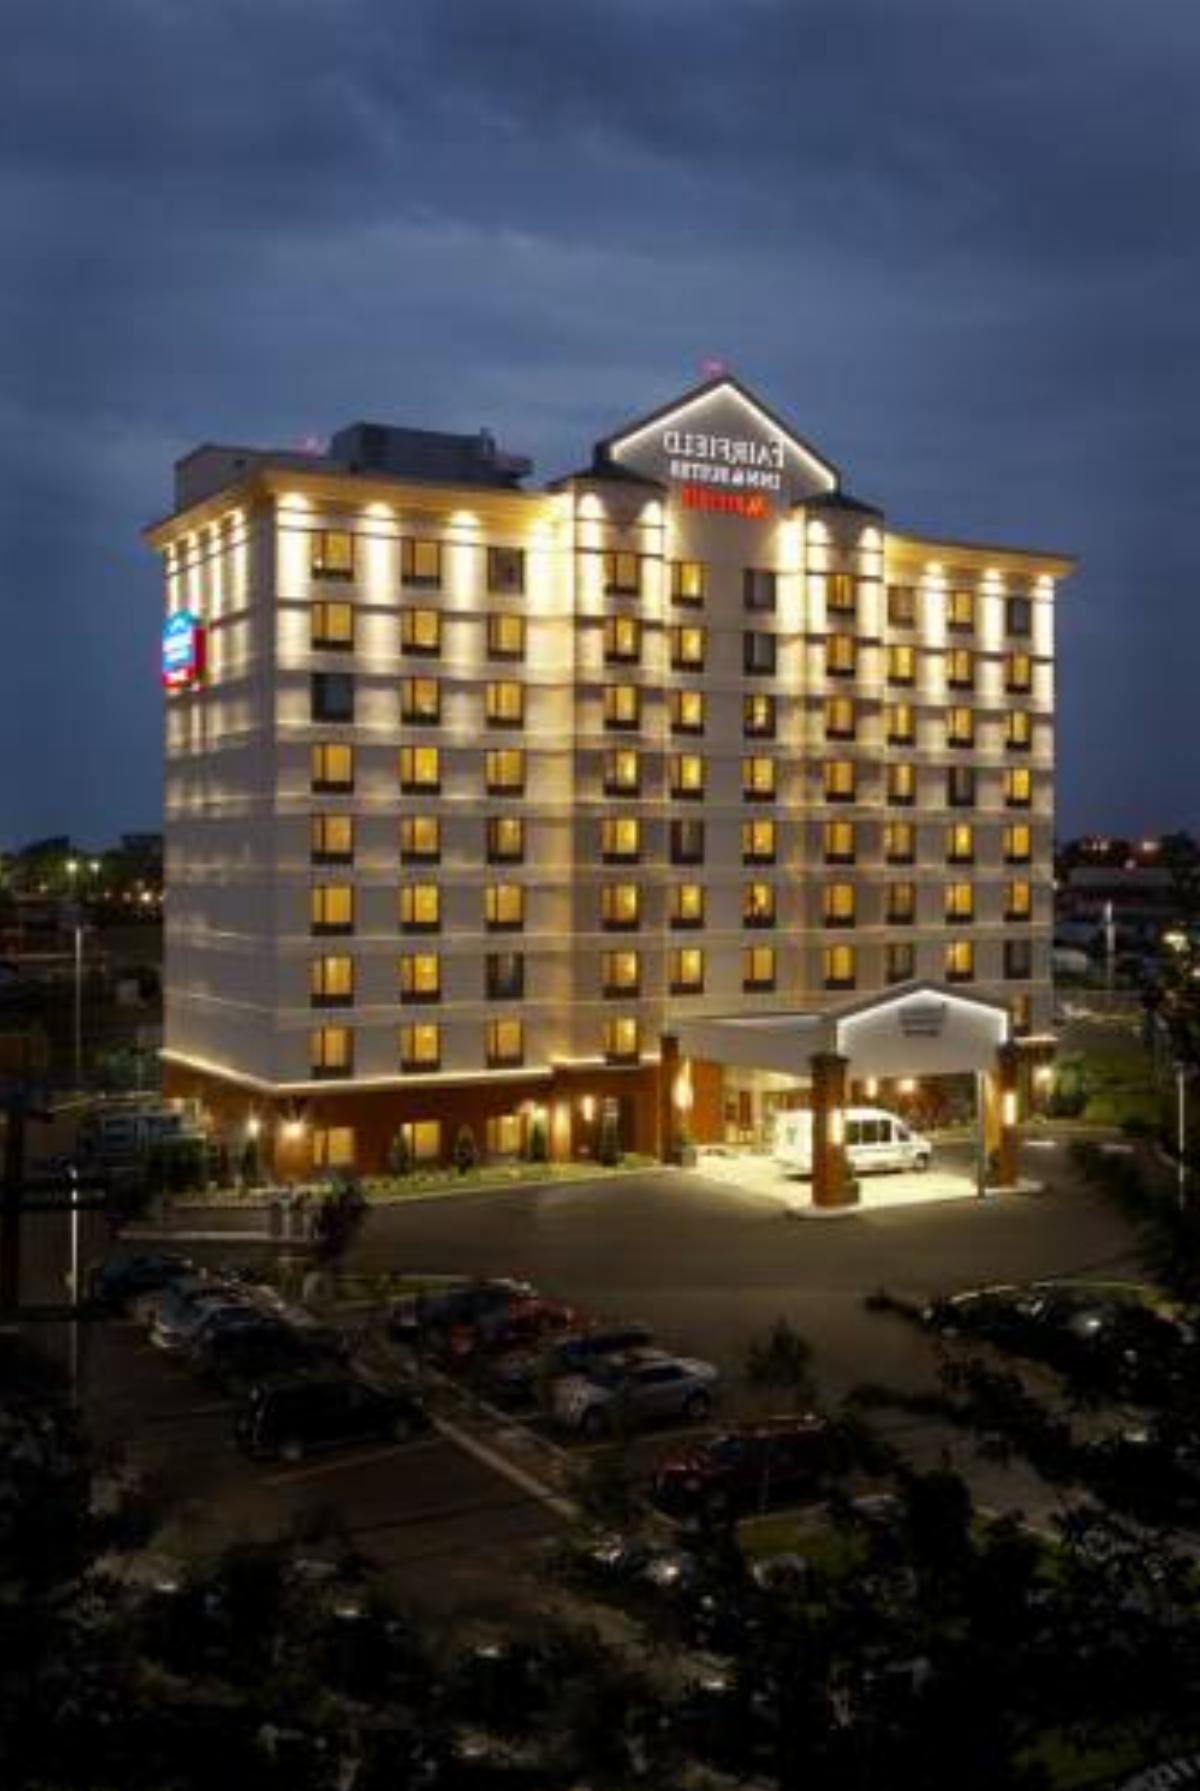 Fairfield Inn & Suites by Marriott Montreal Airport Hotel Dorval Canada